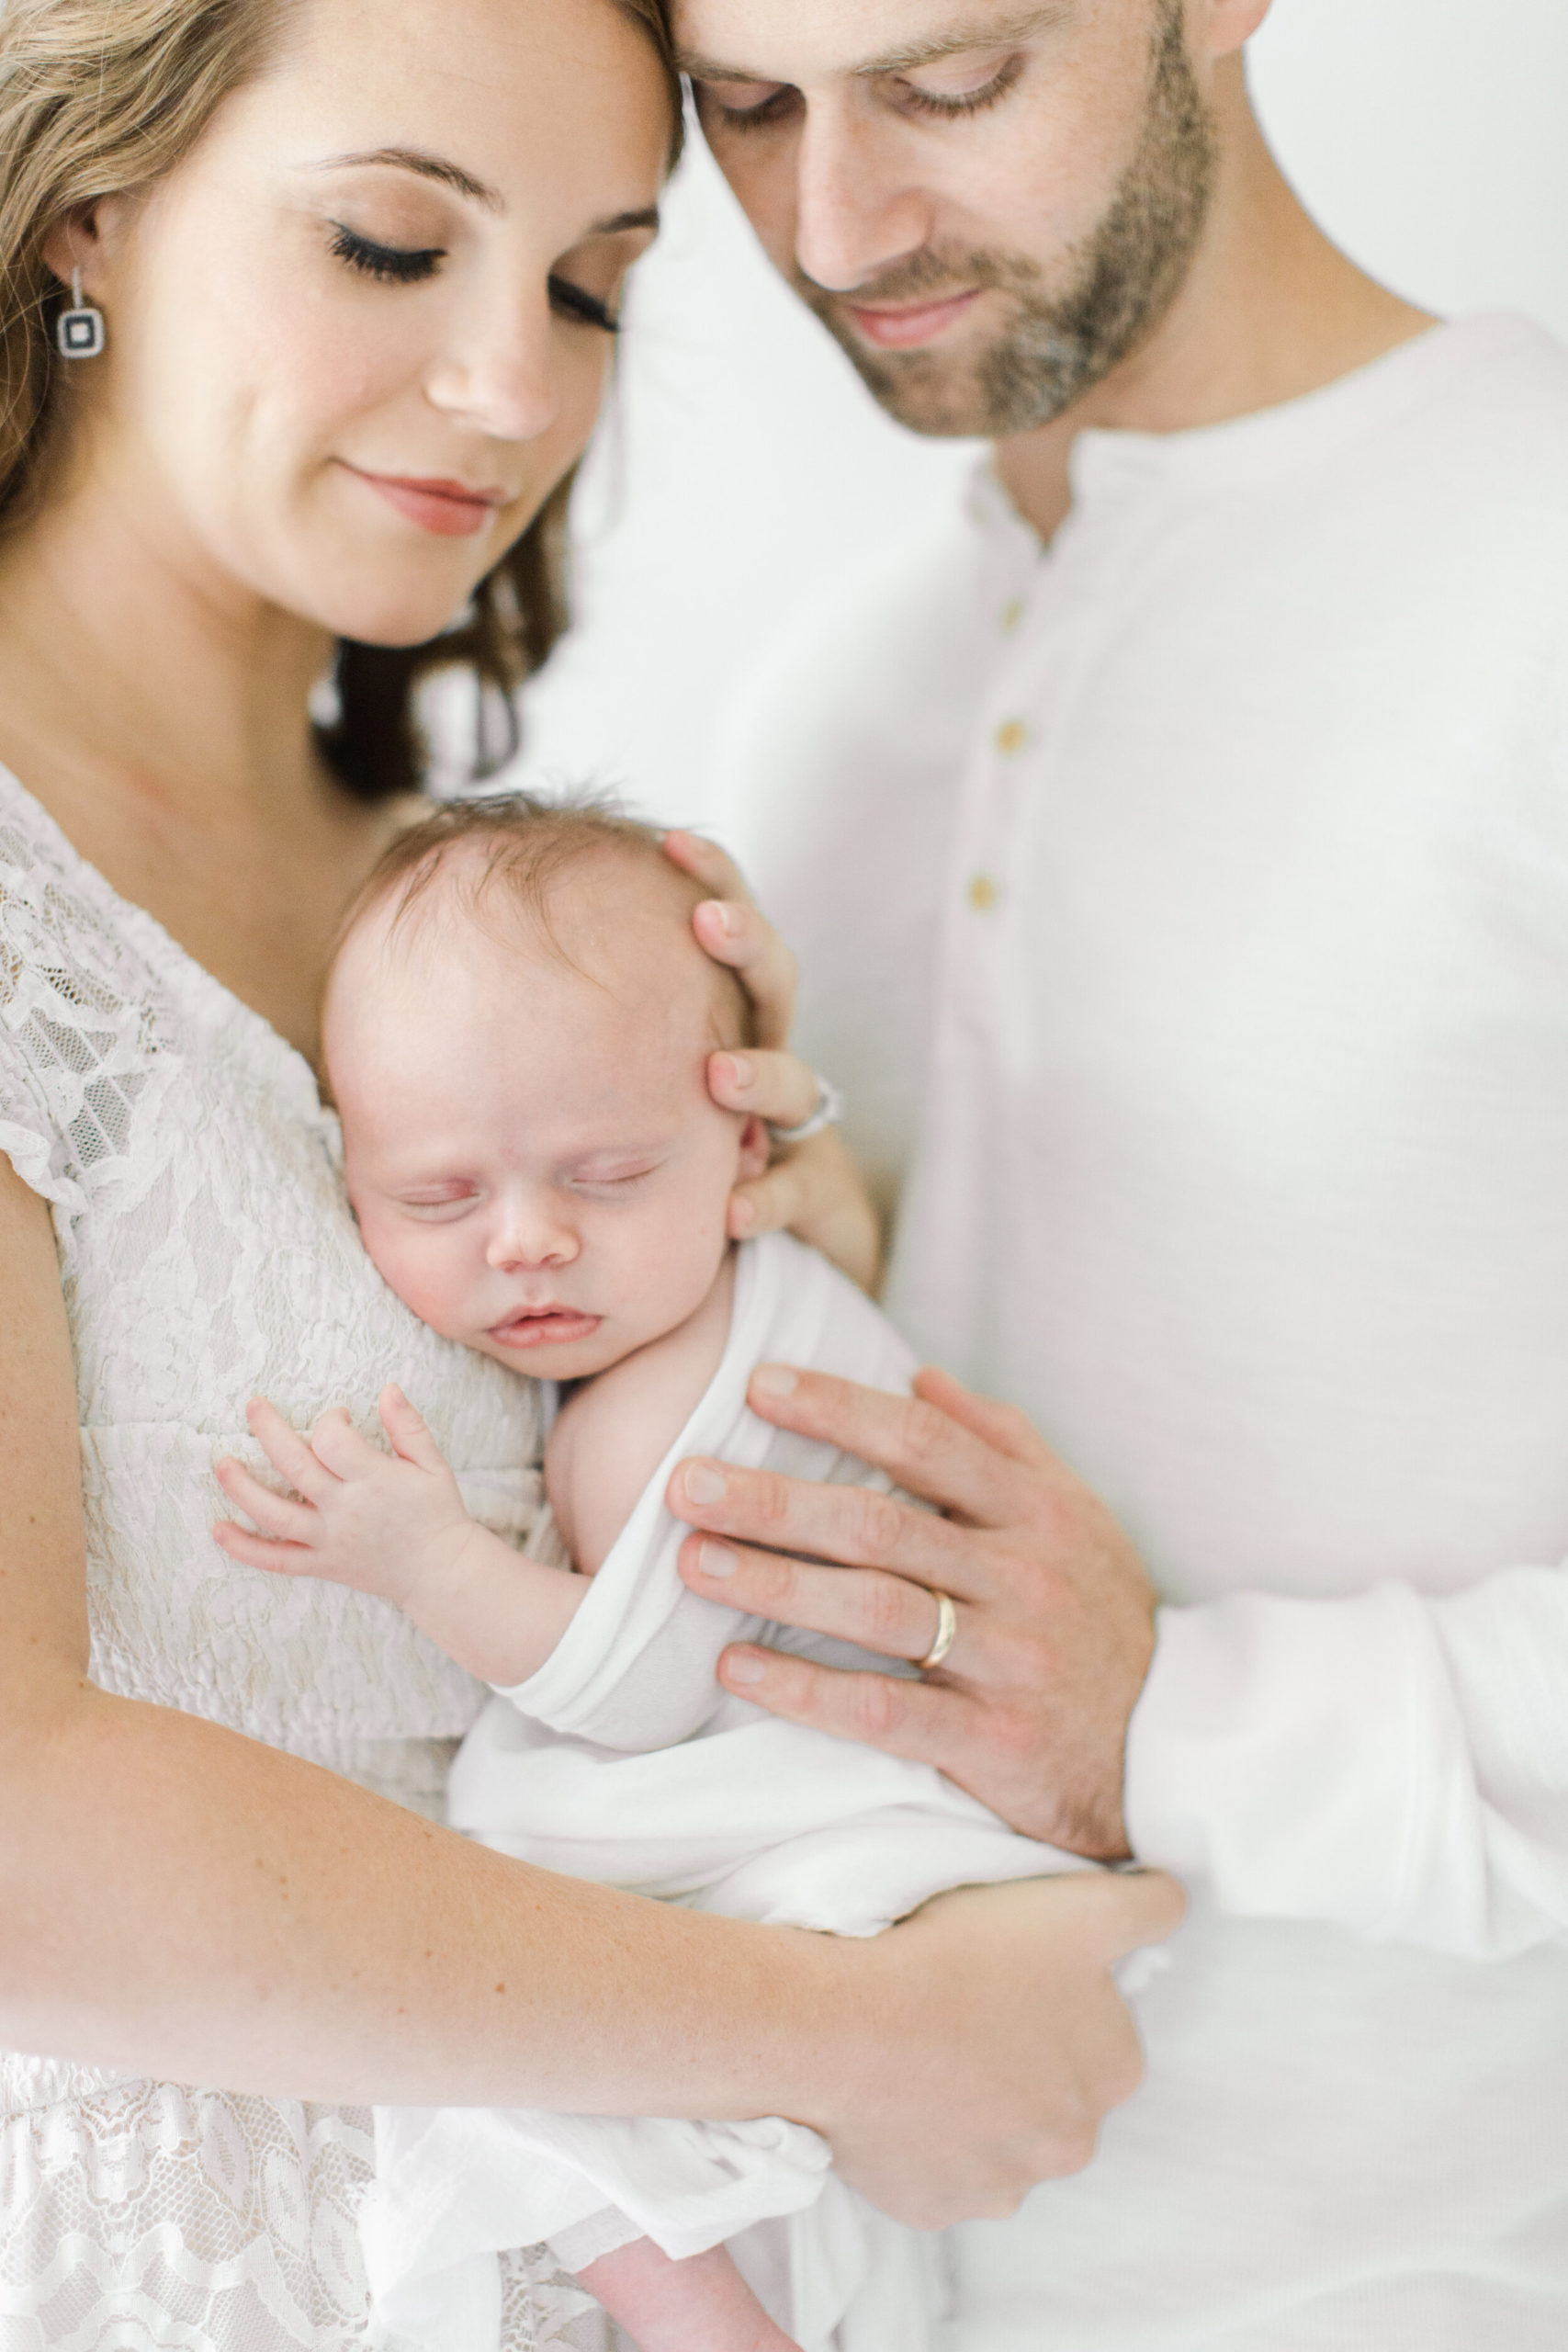 How Do You Plan a Newborn Session When You're Sleep Deprived?